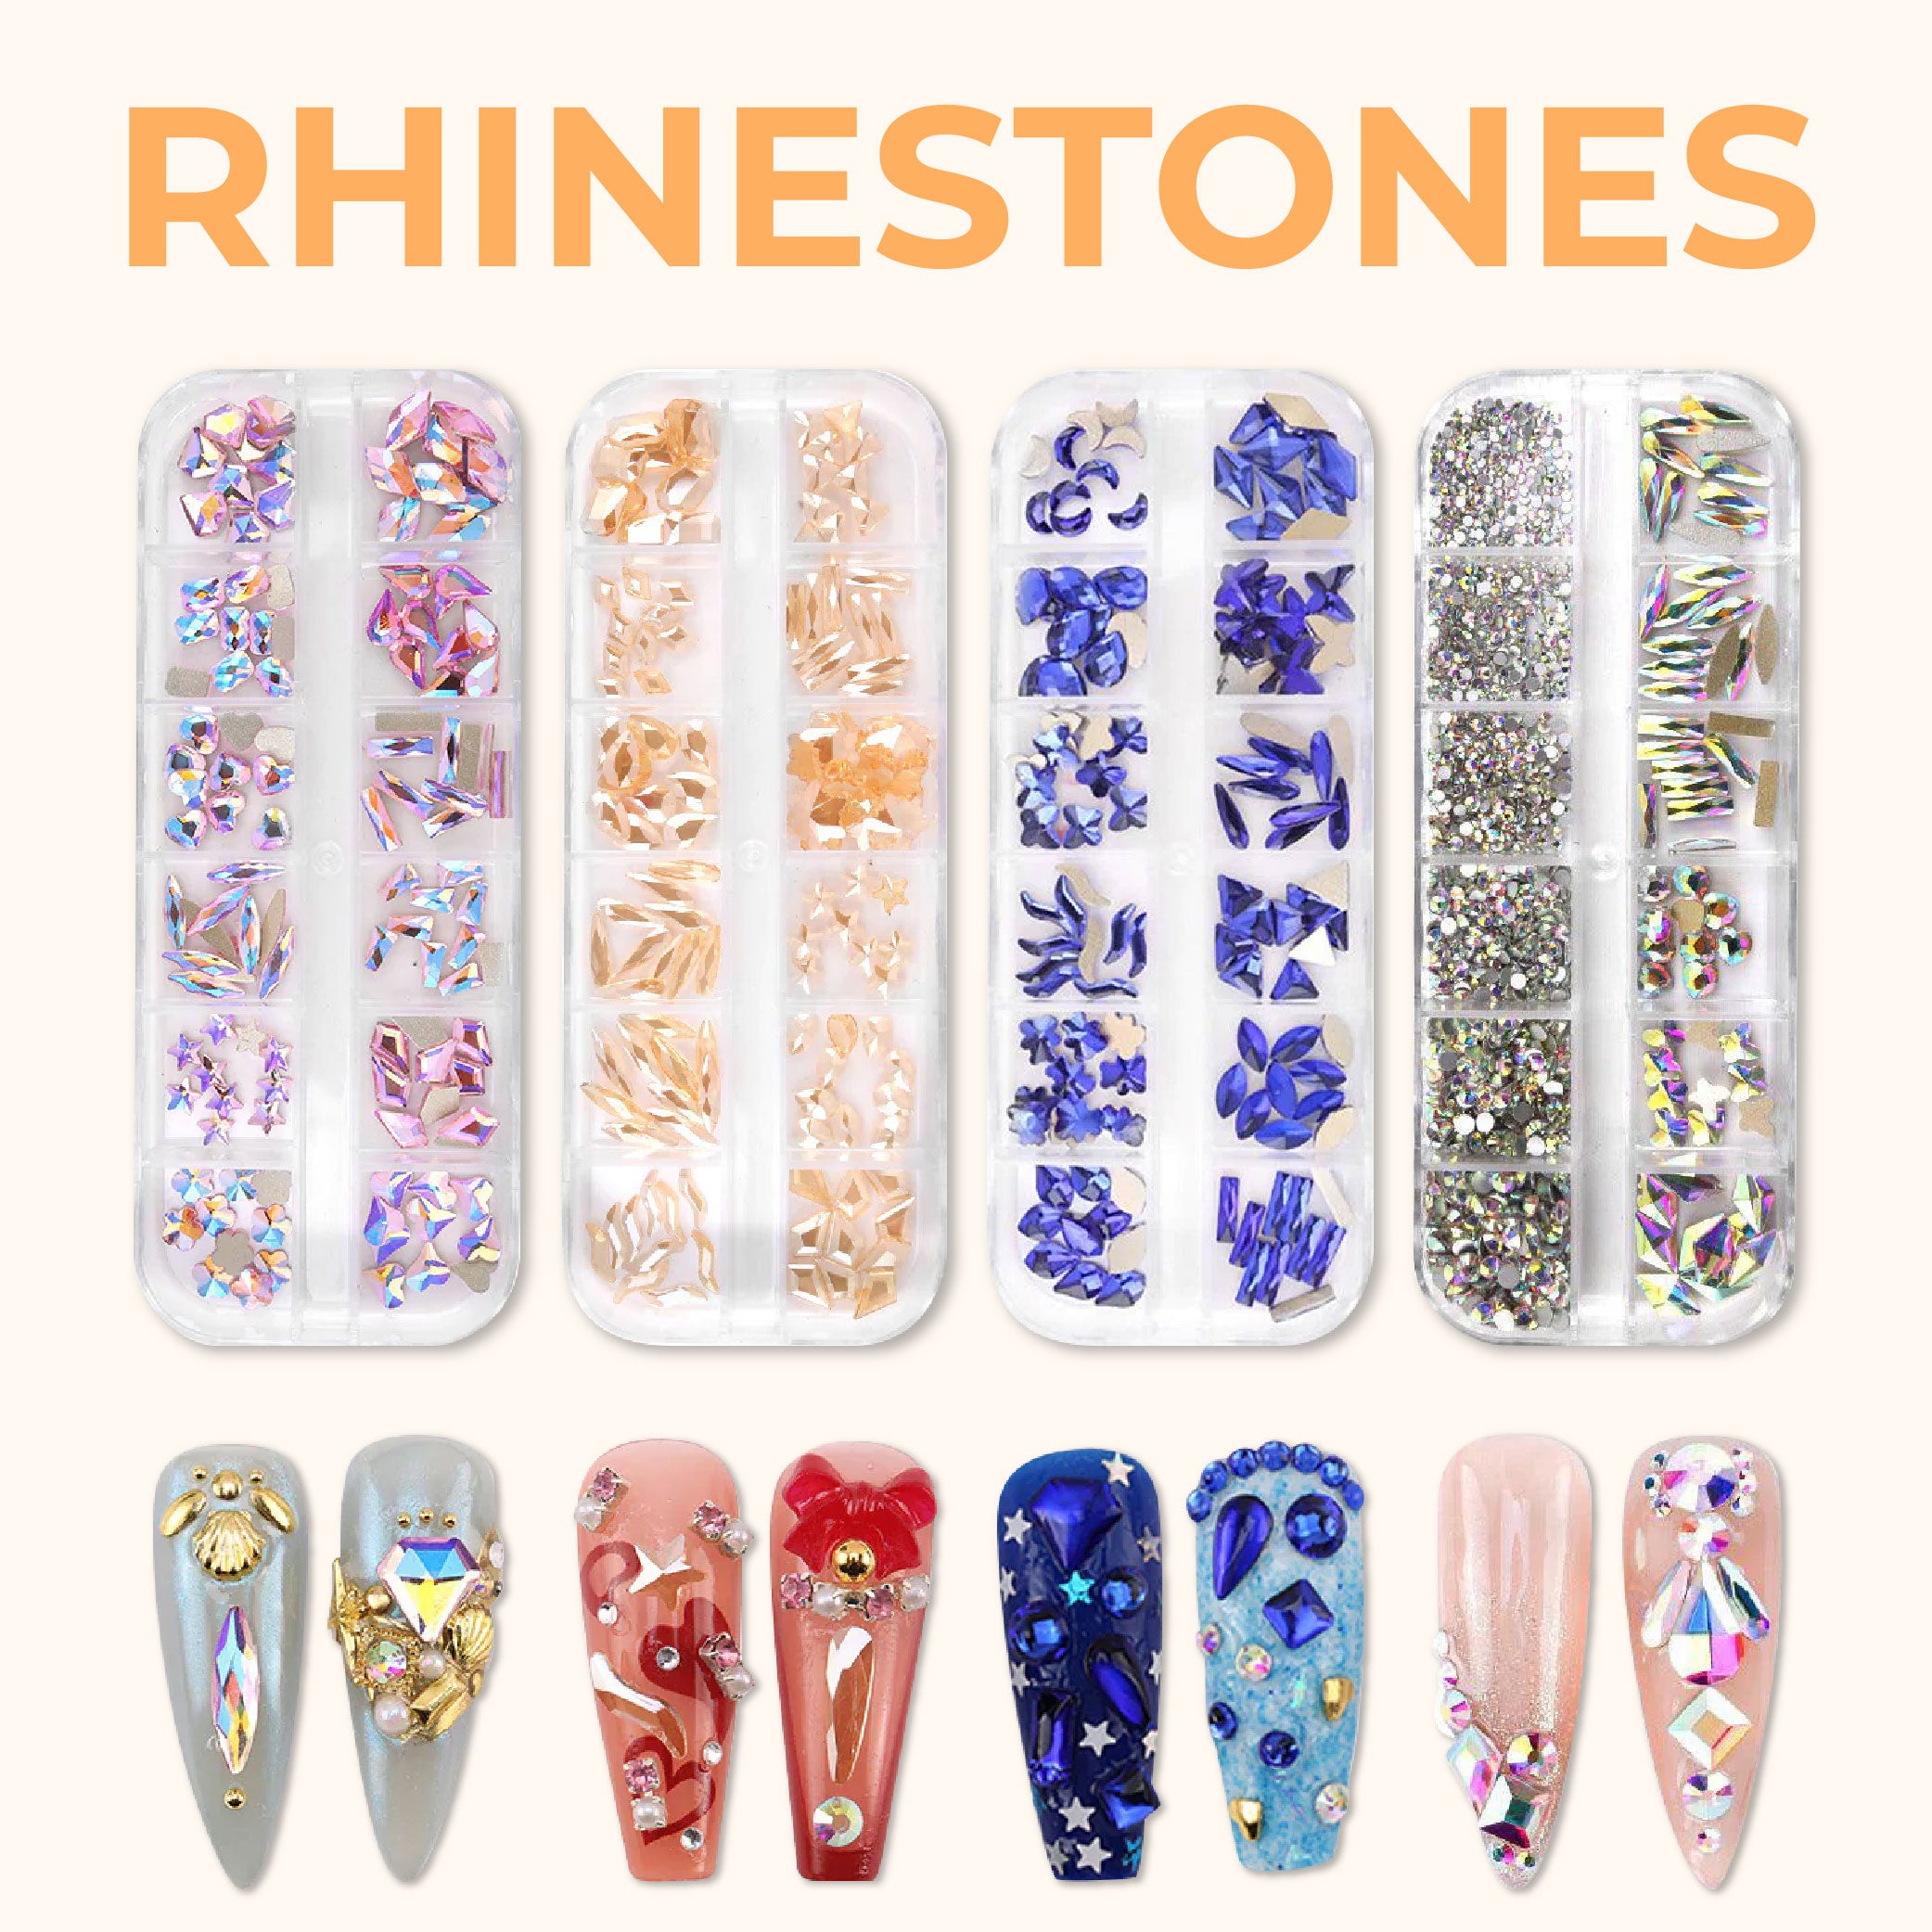 Artdone 9 boxes Nail Rhinestones, Gems, Diamonds, Art Studs, Crystals, Sequins for Nails Kit with 1 Tweezers and 3 Pen